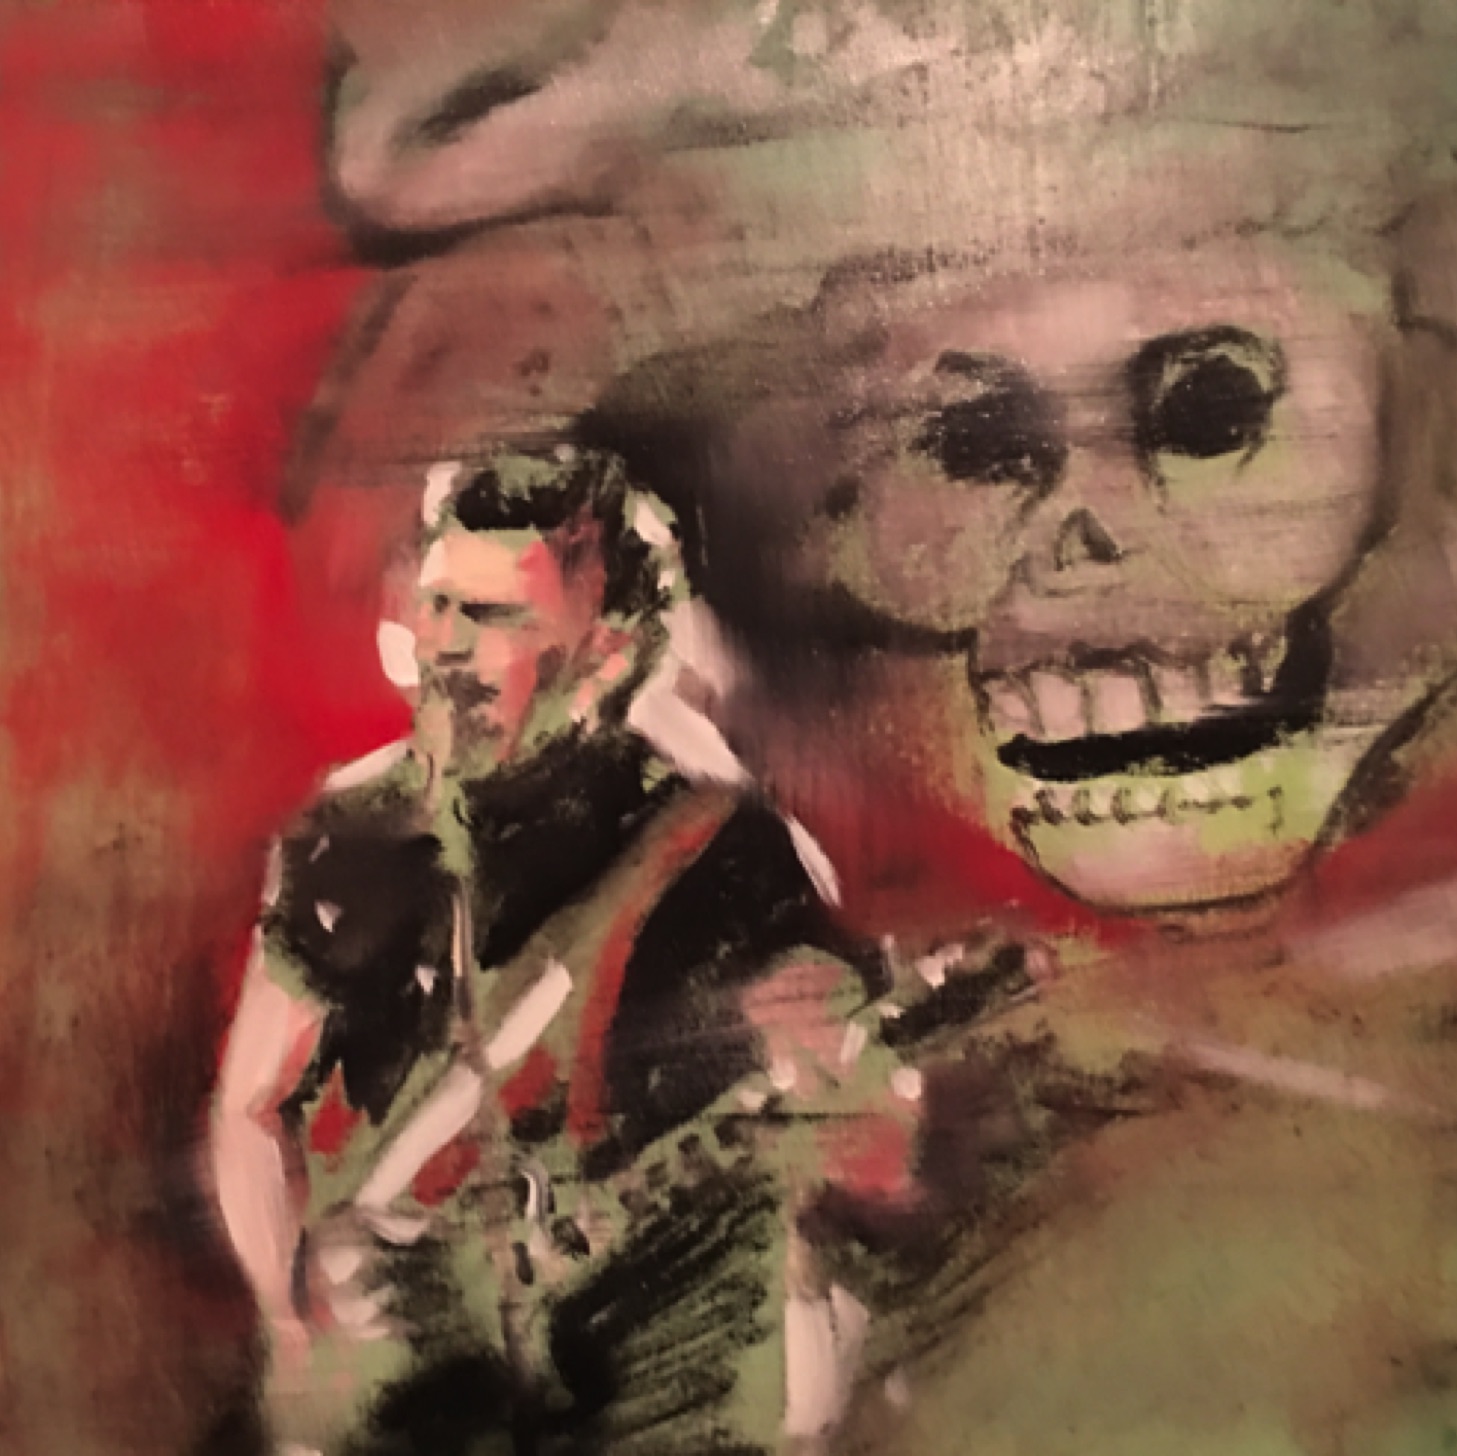 My painting "Heavy Mex " carries Sergio Arau into a Los Angeles rock club where he wildly strums his fender guitar. 

He is the son of film director Alfonso Arau and the husband of the brilliant actress, writer, and director Yareli Arizmendi. 
Sergio Arau rose to prominence as a founding member of the band Botellita de Jerez formed in 1983.

(Exhibited and sold at The Other Art Fair, Los Angeles 2018)
David Seidler Collection, Los Angeles, California